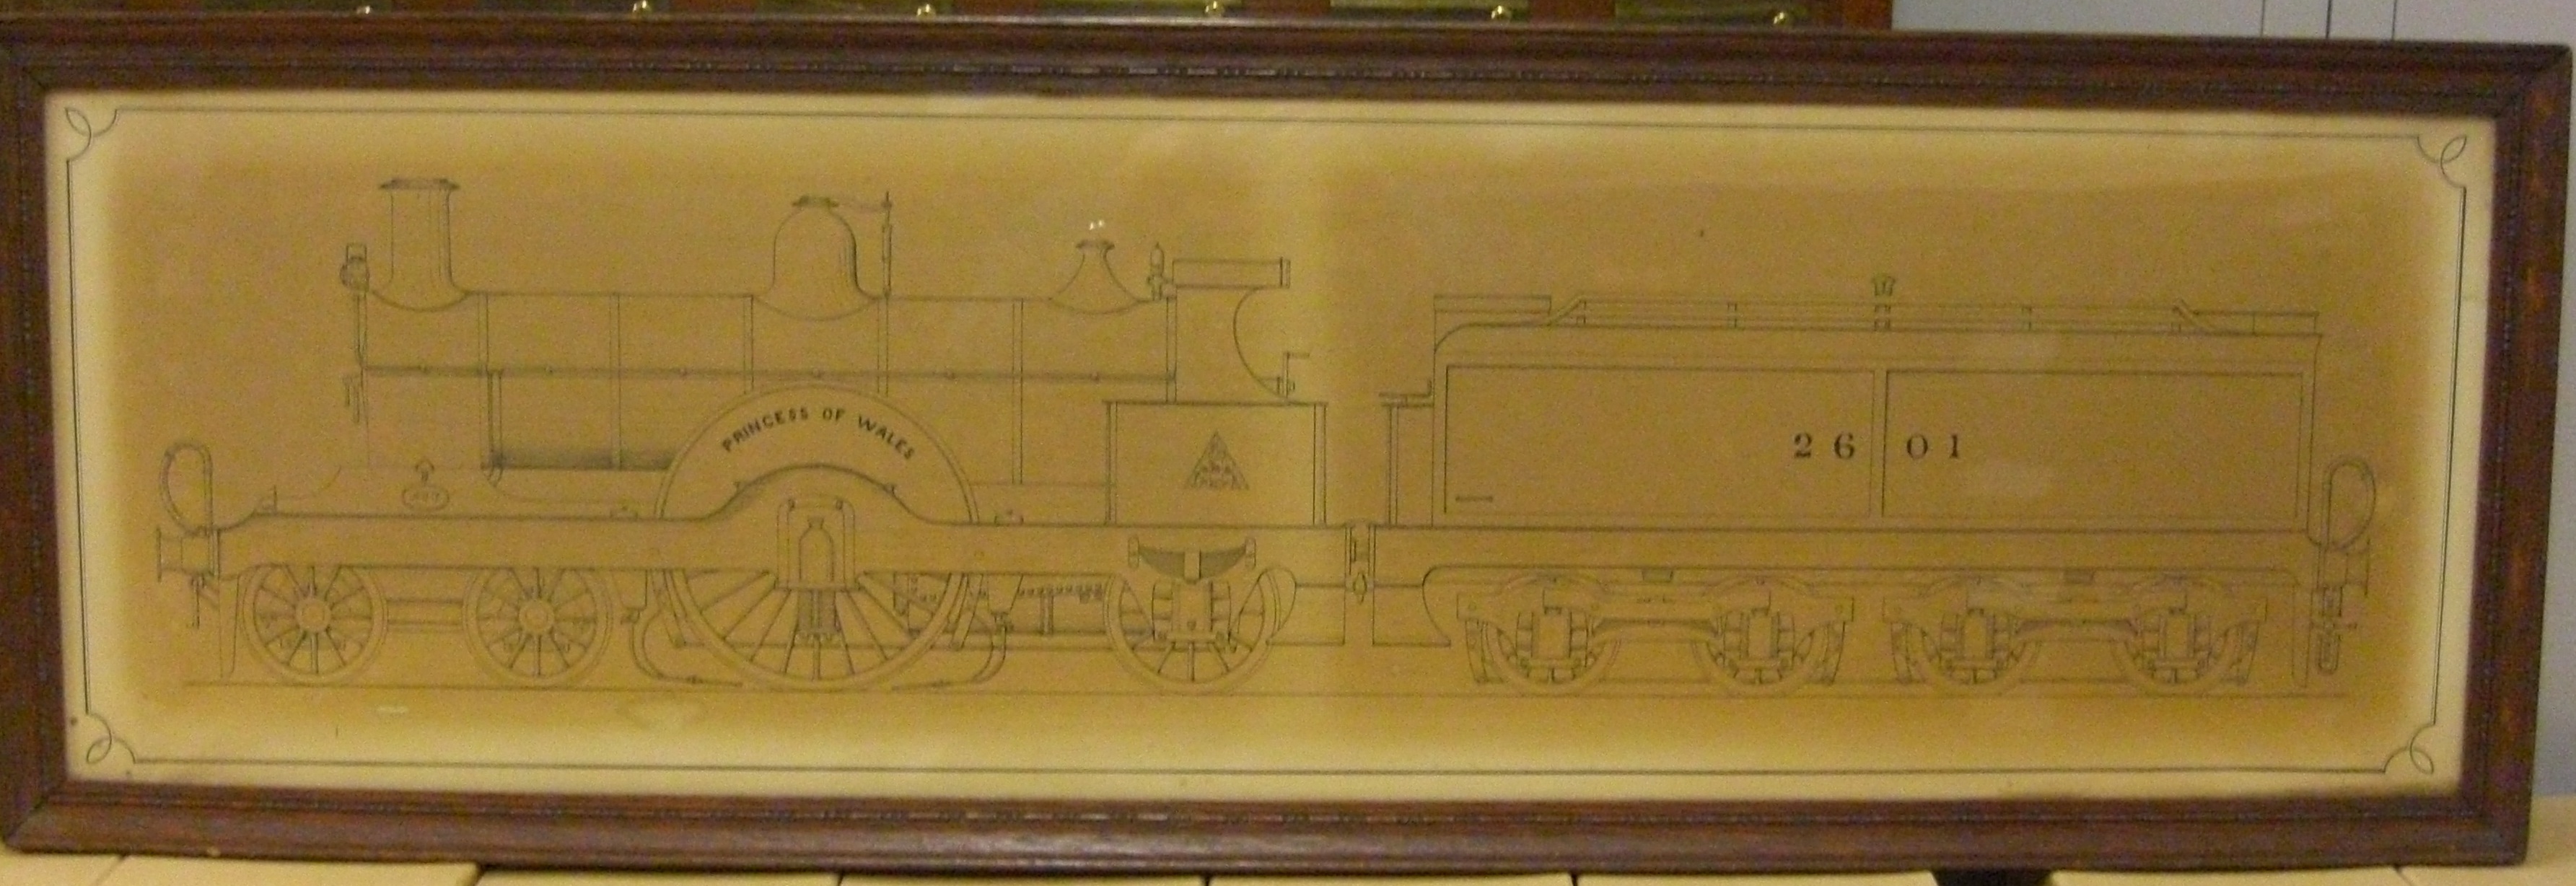 2601 Princess of Wales drawing (click for larger version)